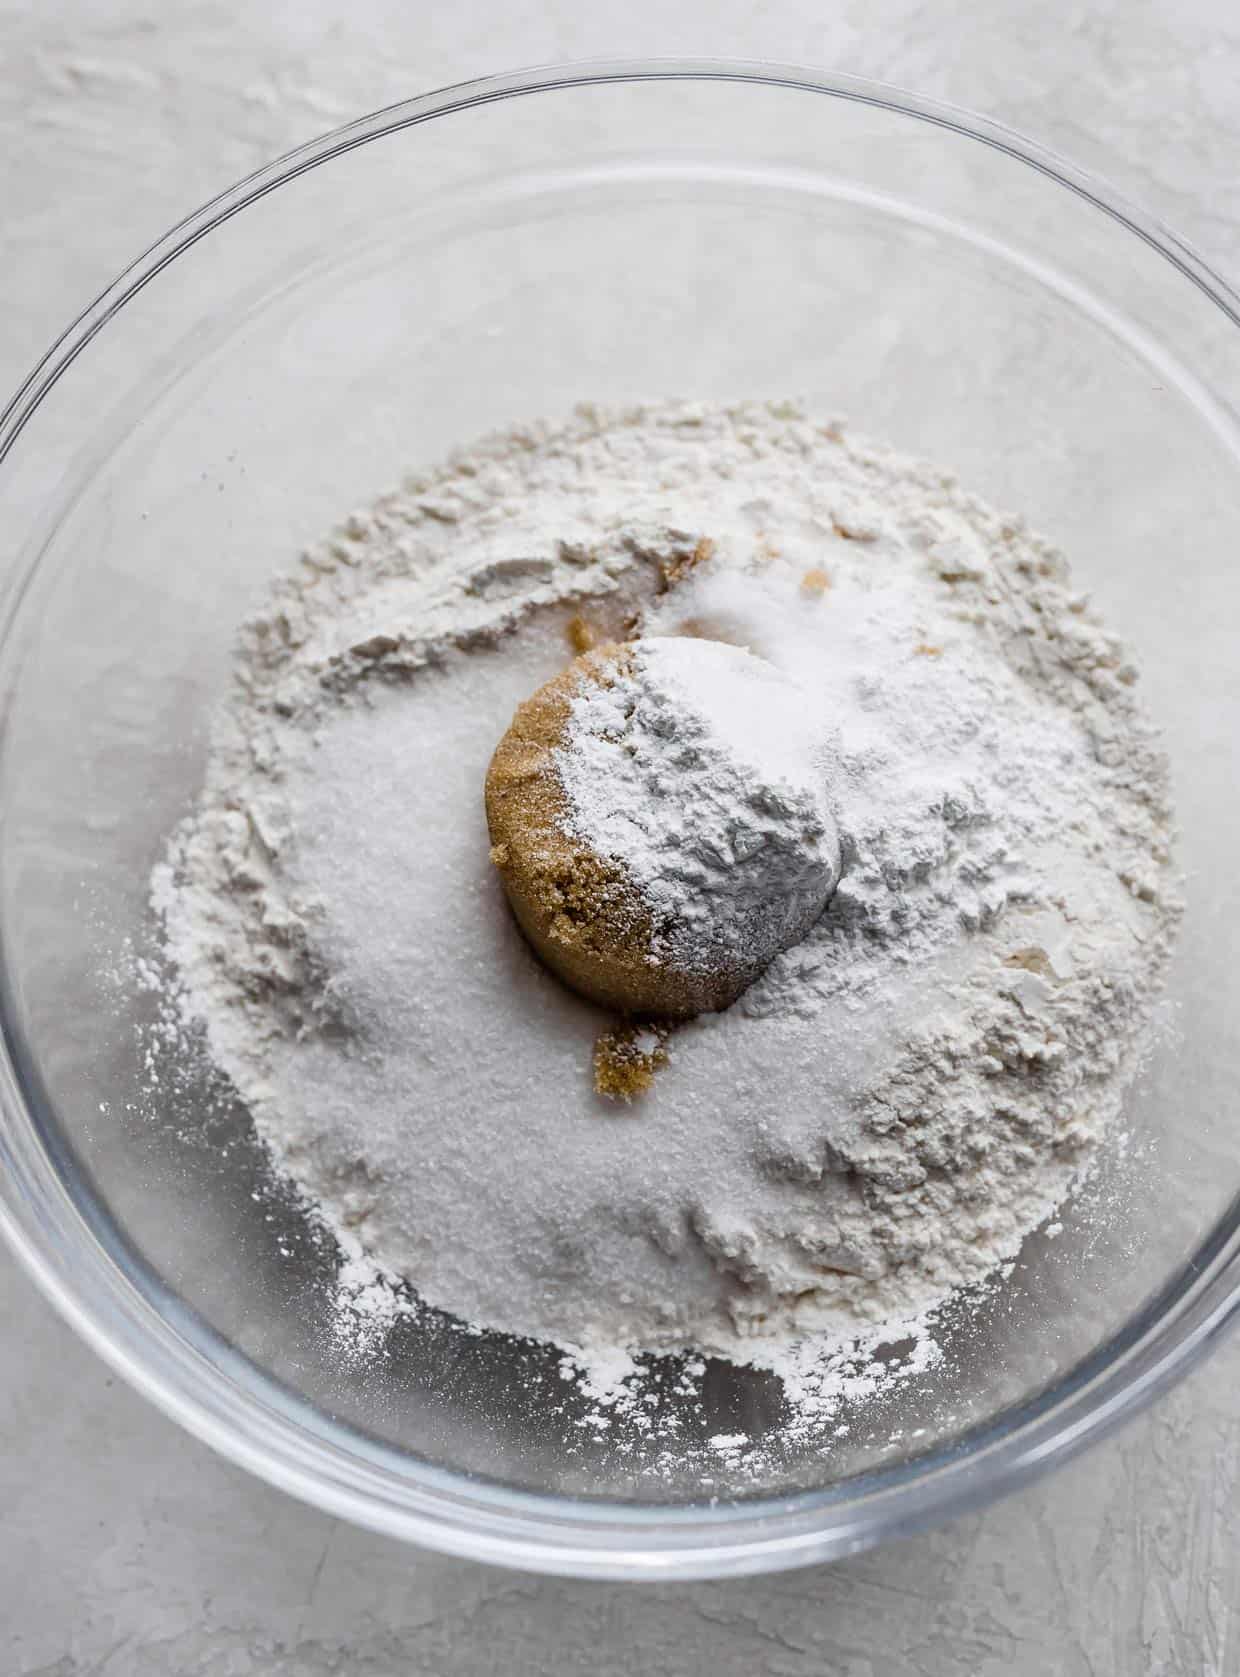 Flour, brown sugar, sugar and other white dry ingredients in a glass bowl.